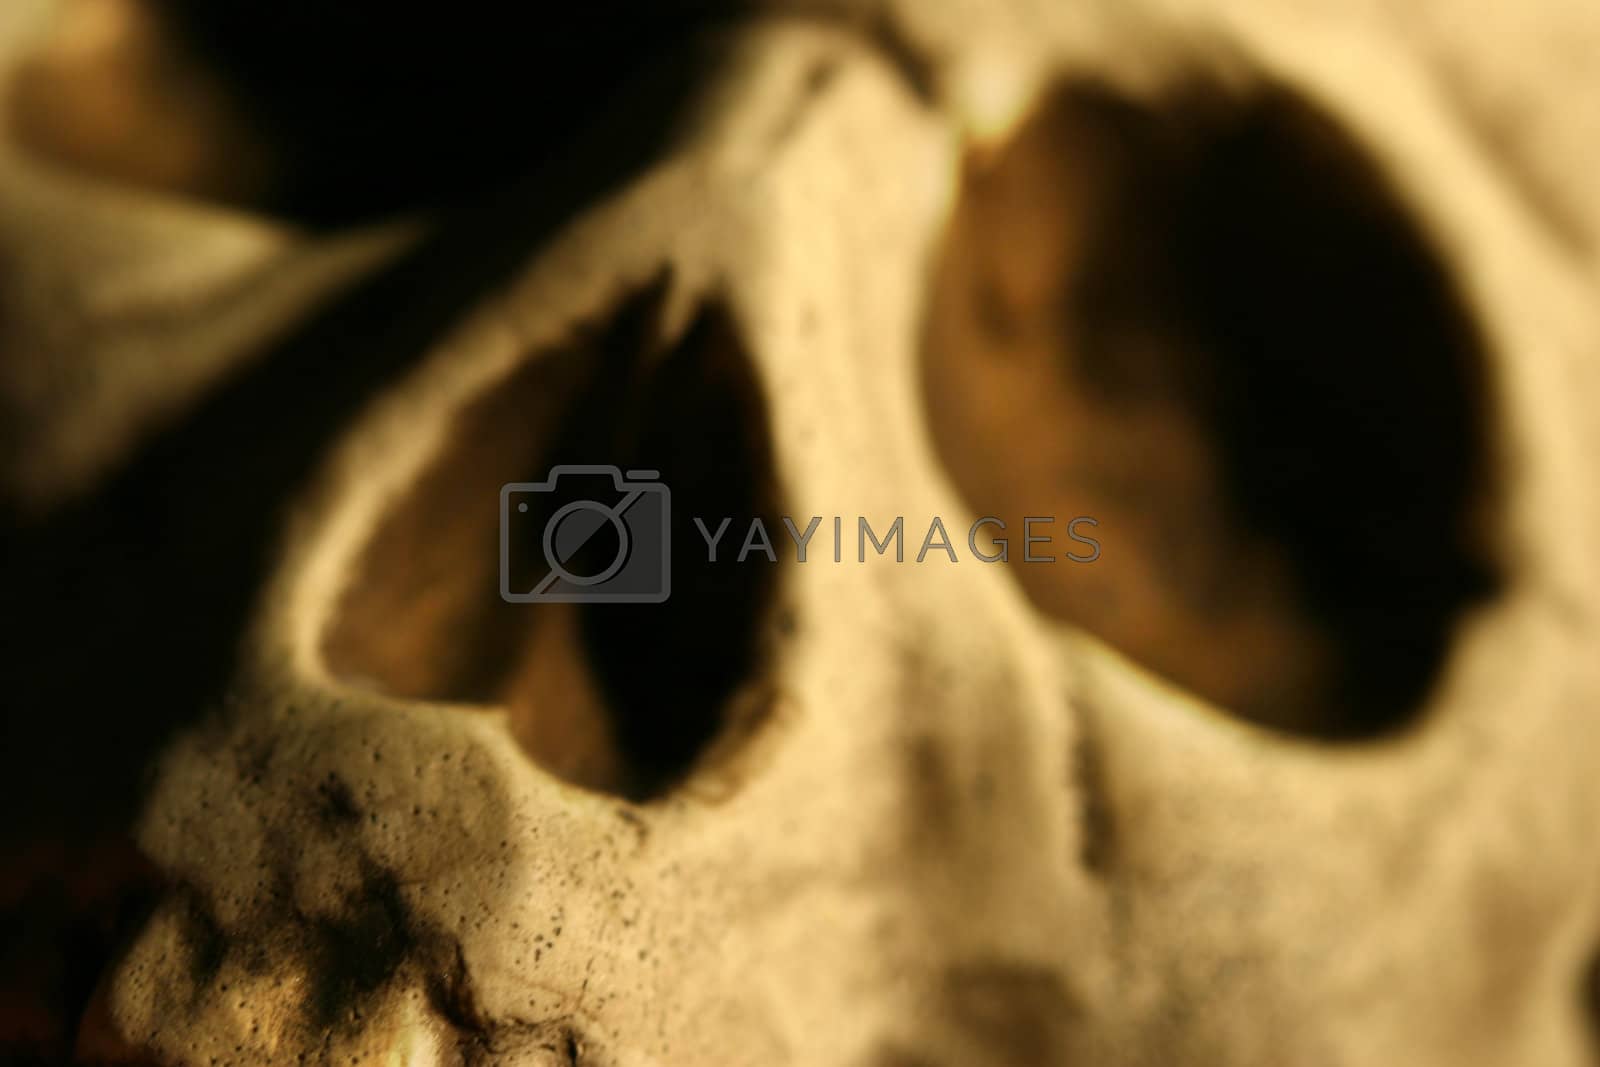 Royalty free image of Closeup of skull by Sandralise